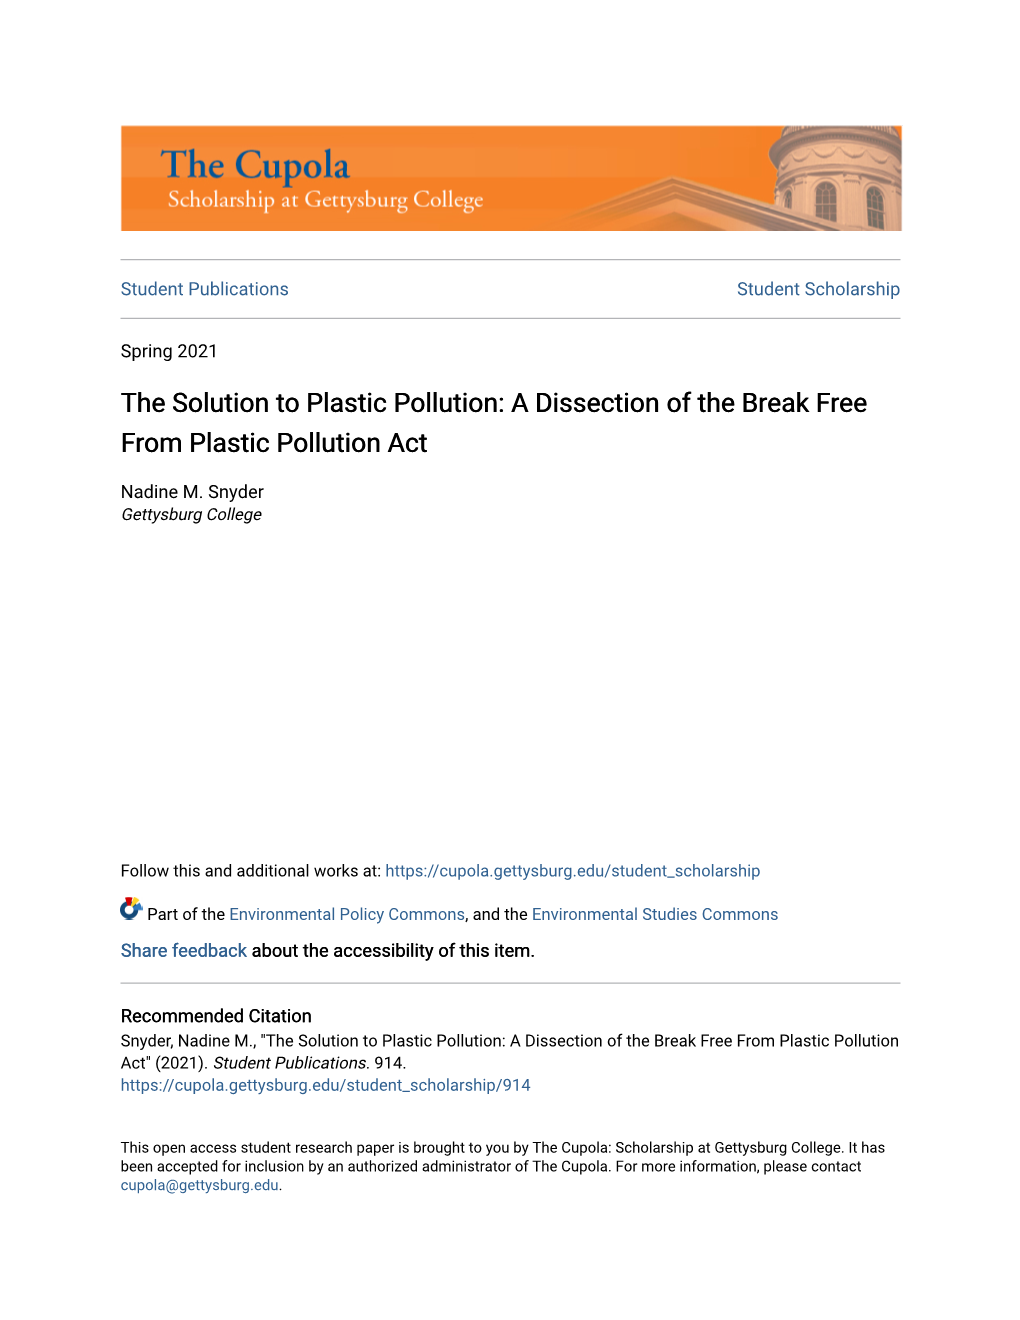 A Dissection of the Break Free from Plastic Pollution Act